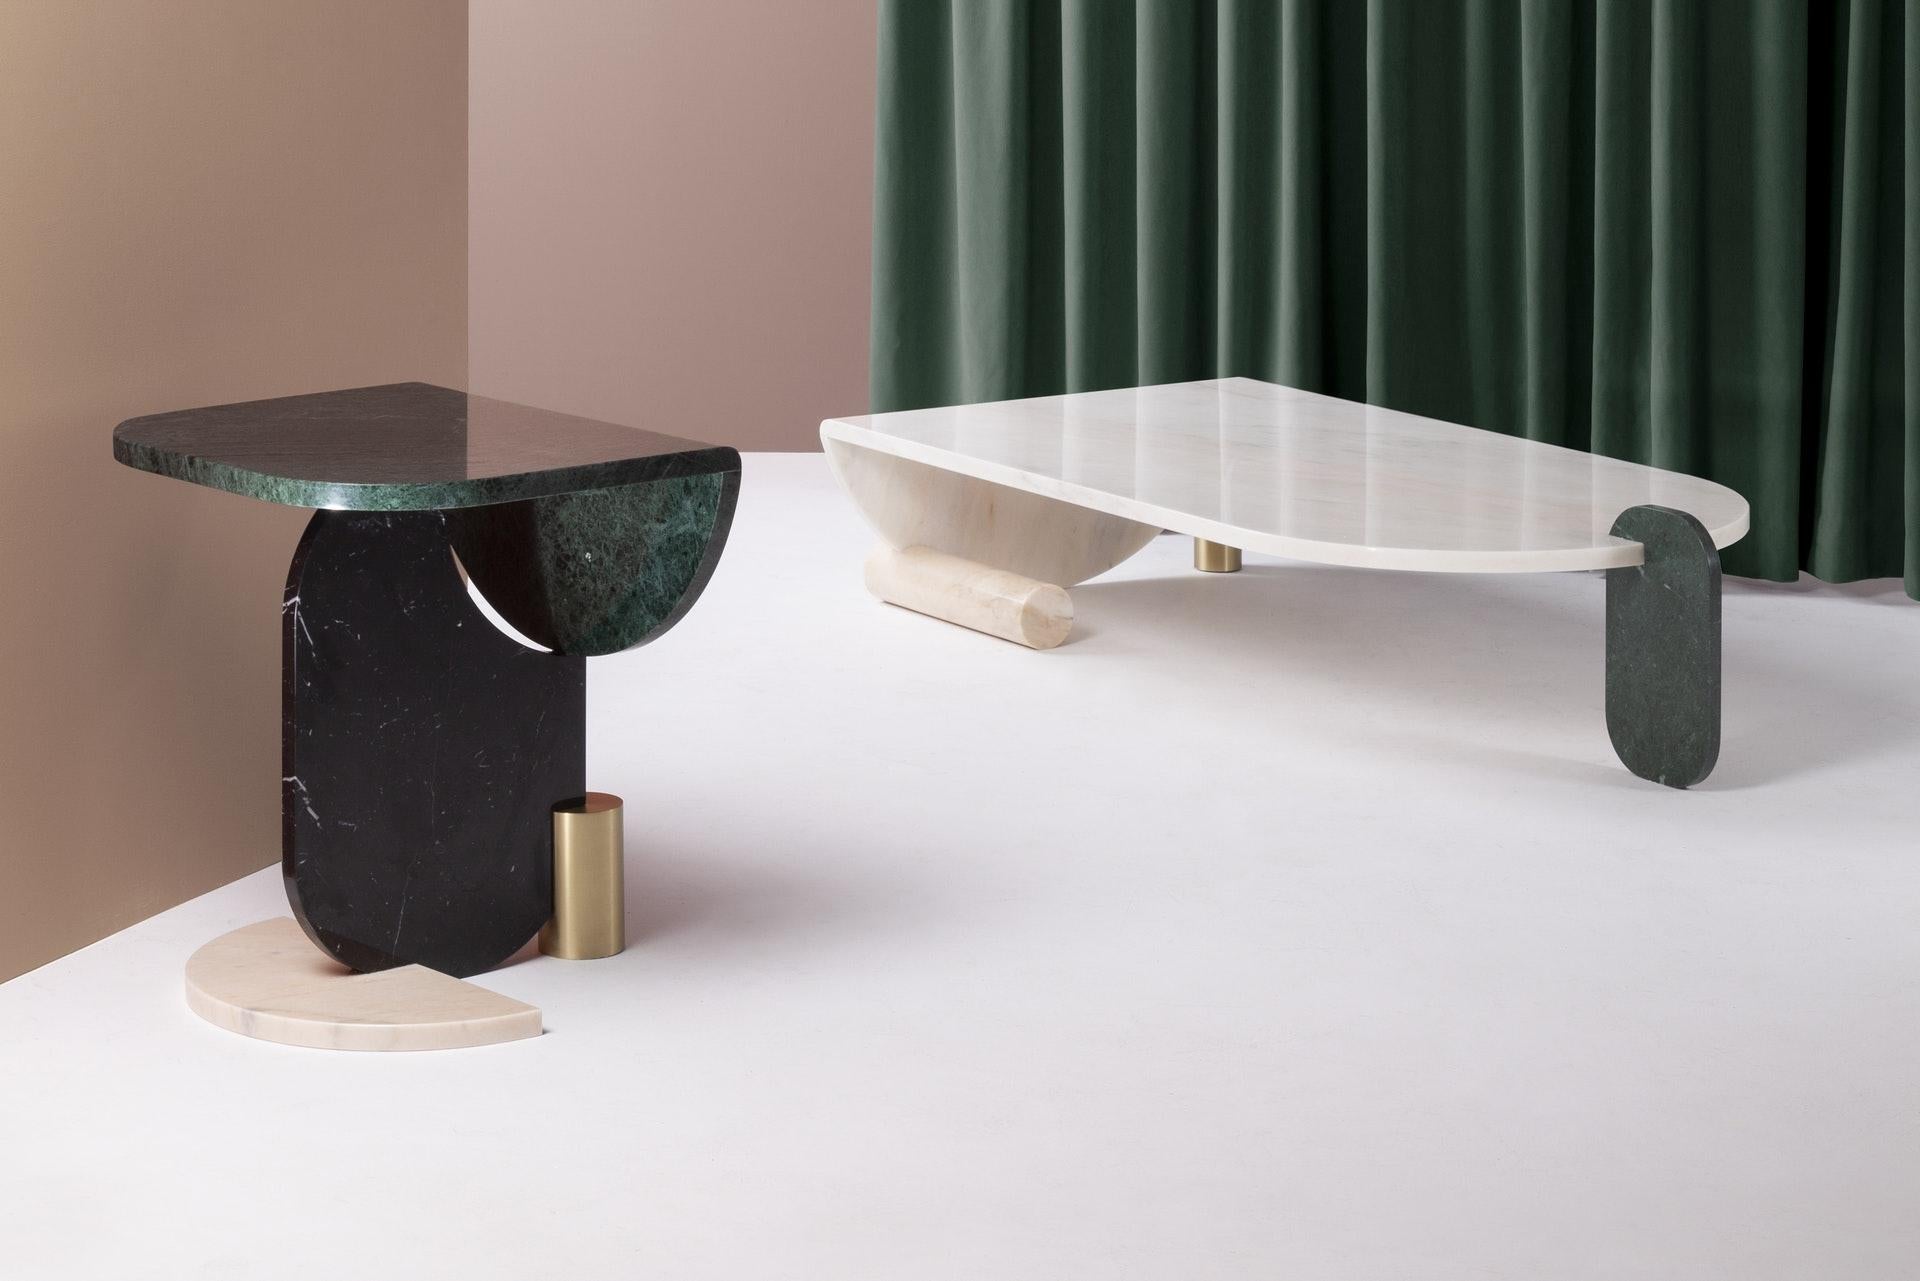 Bauhaus DOOQ Side Table in White, Nero Marquina, Green Guat. Marble& Brass Playing Games For Sale